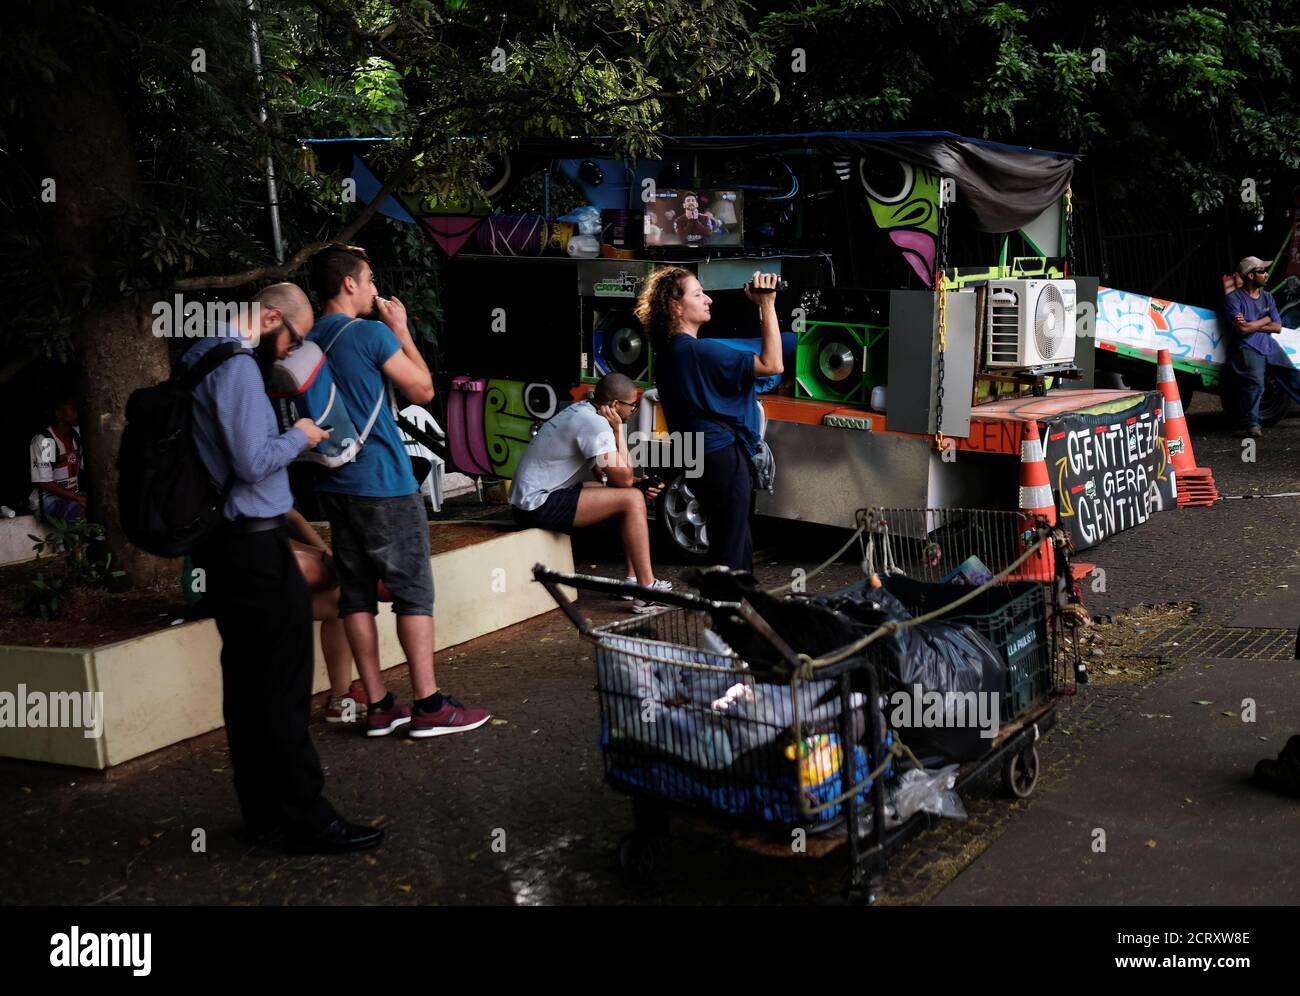 People watch Barcelona's Lionel Messi gesture against Chelsea on the TV of Lucena (not pictured) who recycles used materials on his cart in Sao Paulo, Brazil, February 20, 2018. REUTERS/Nacho Doce Stock Photo